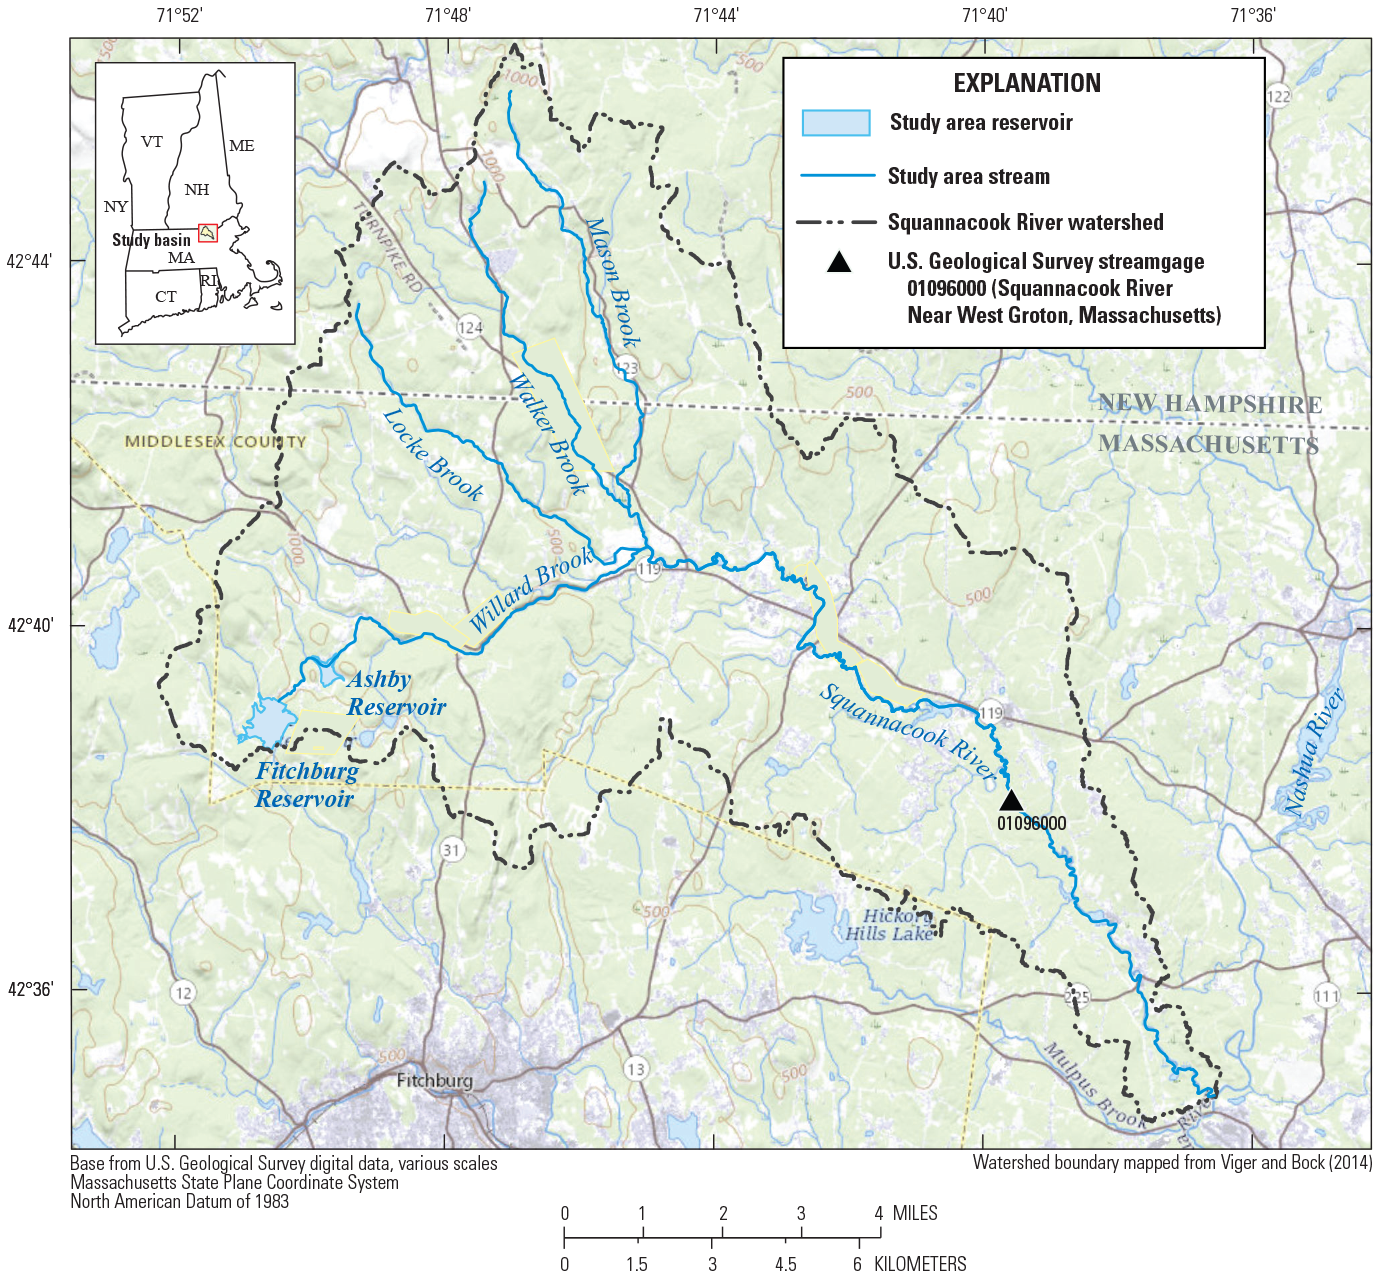 The Squannacook River watershed is mostly in Massachusetts, but the northern part
                        is in New Hampshire